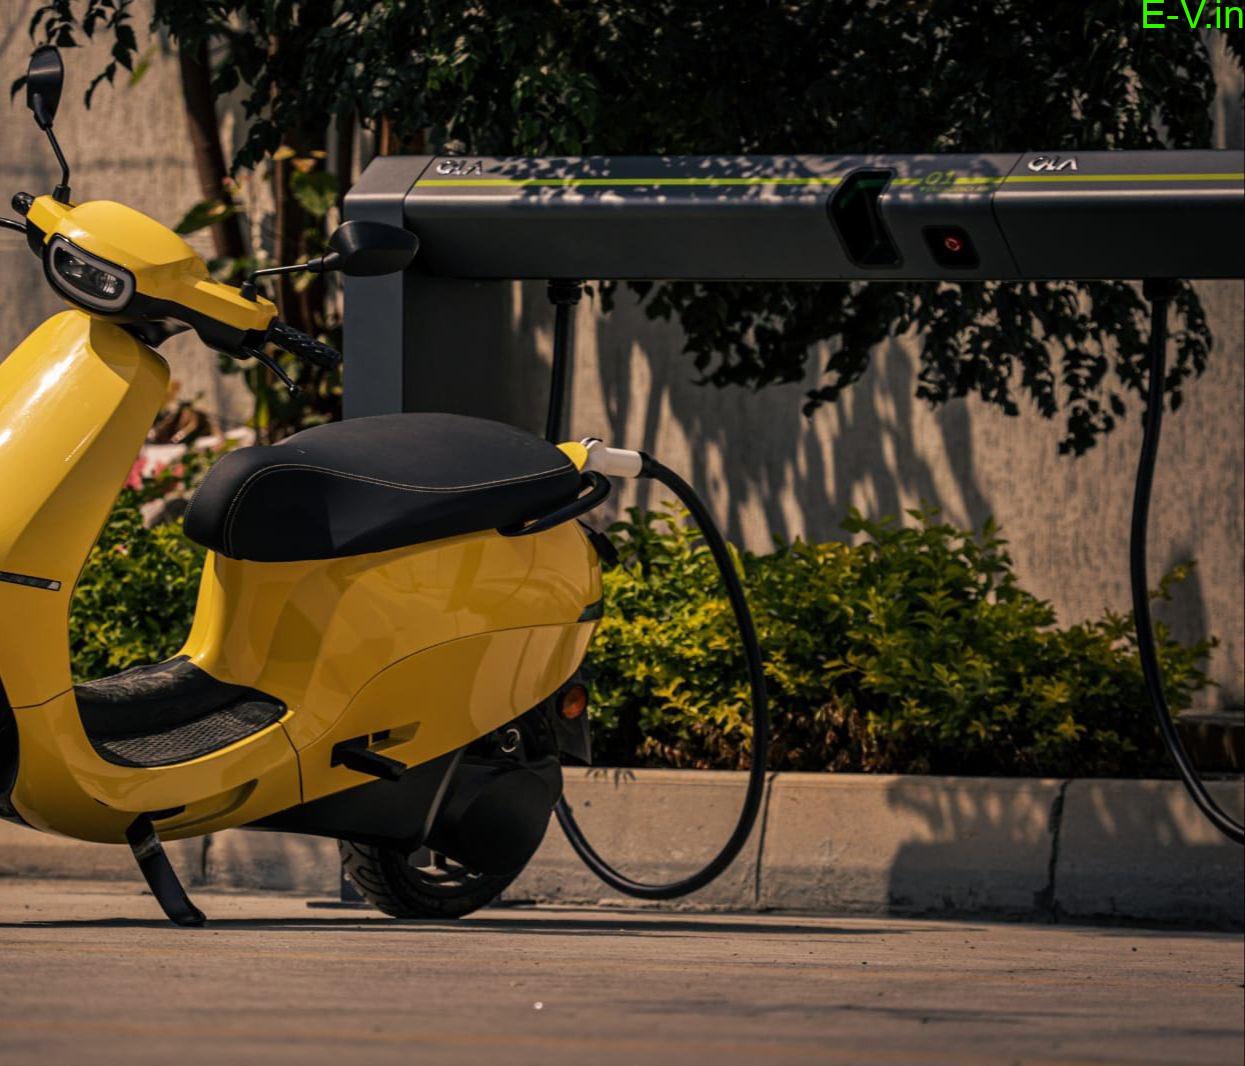 Ola electric scooters